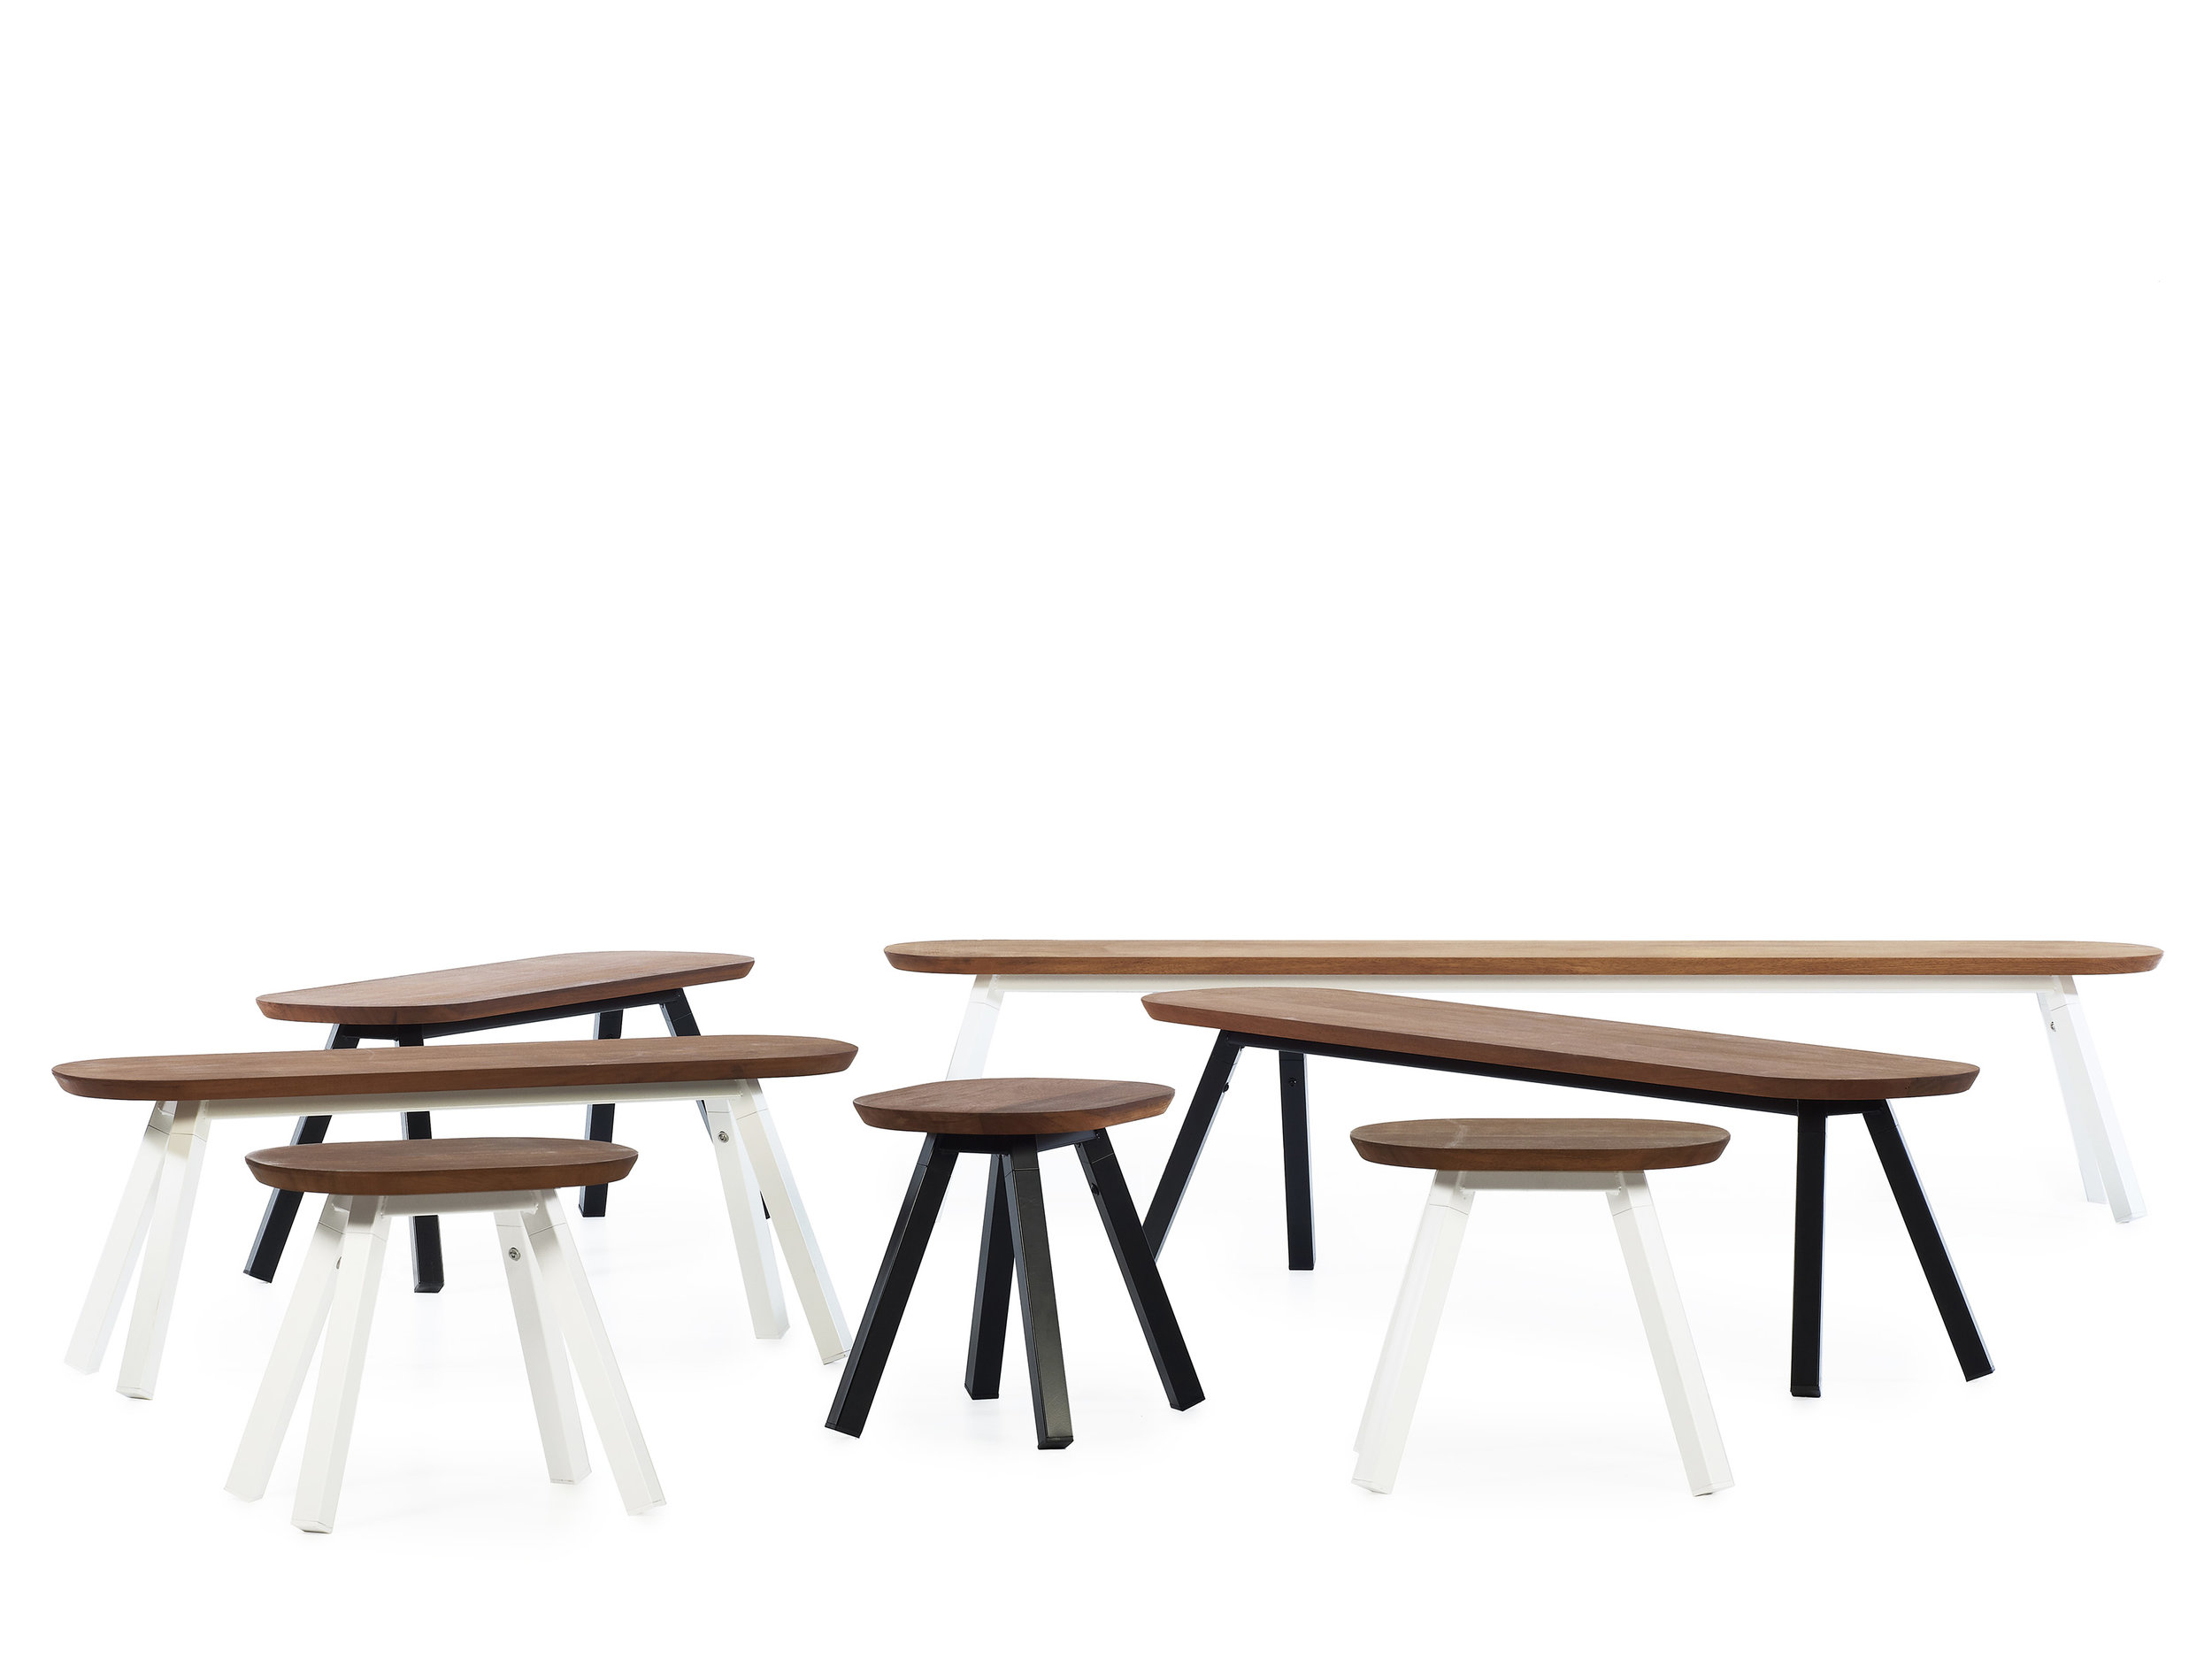 YM Benches by RS Barcelona